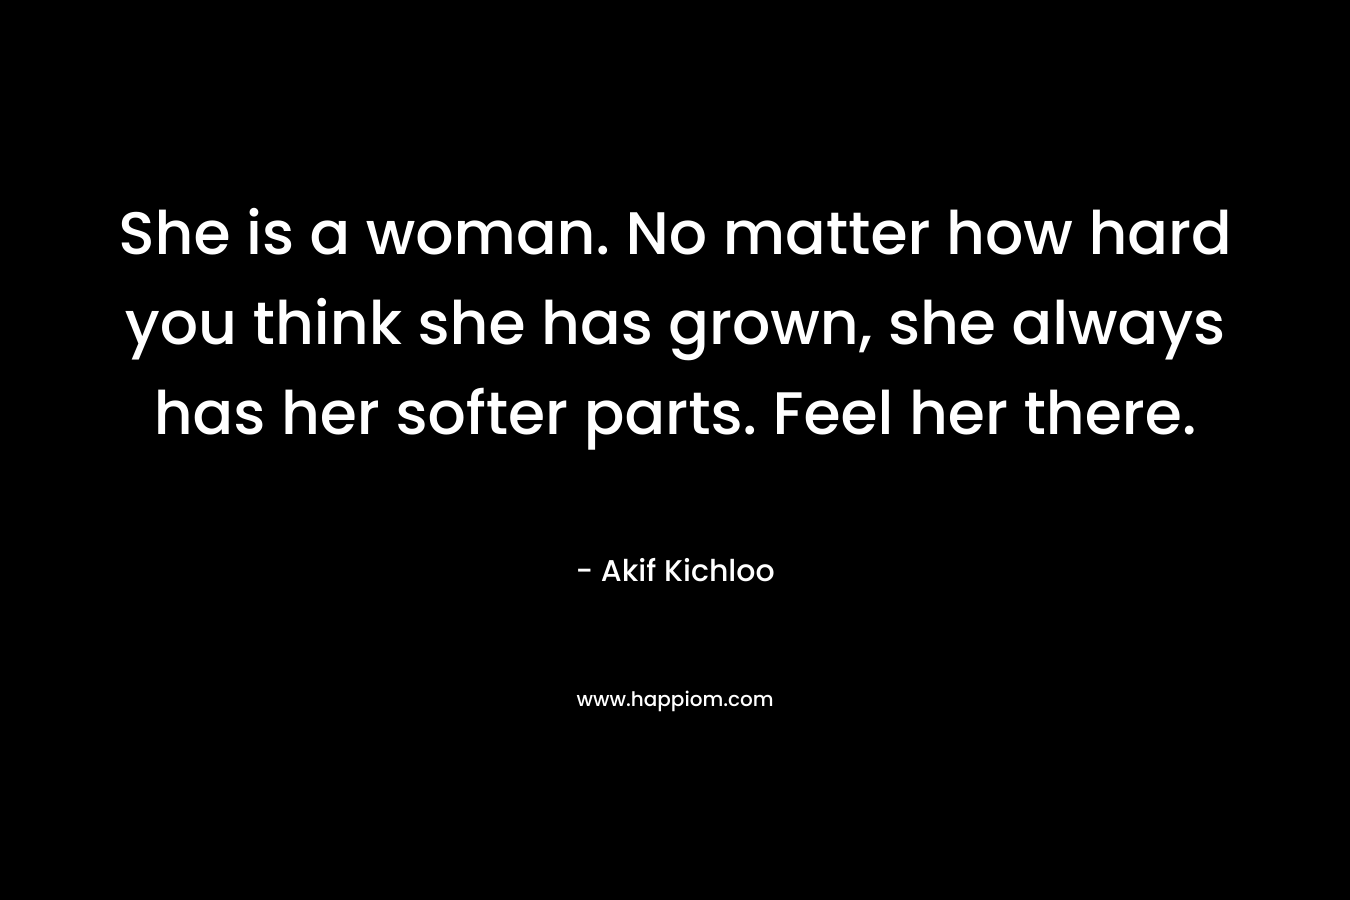 She is a woman. No matter how hard you think she has grown, she always has her softer parts. Feel her there. – Akif Kichloo